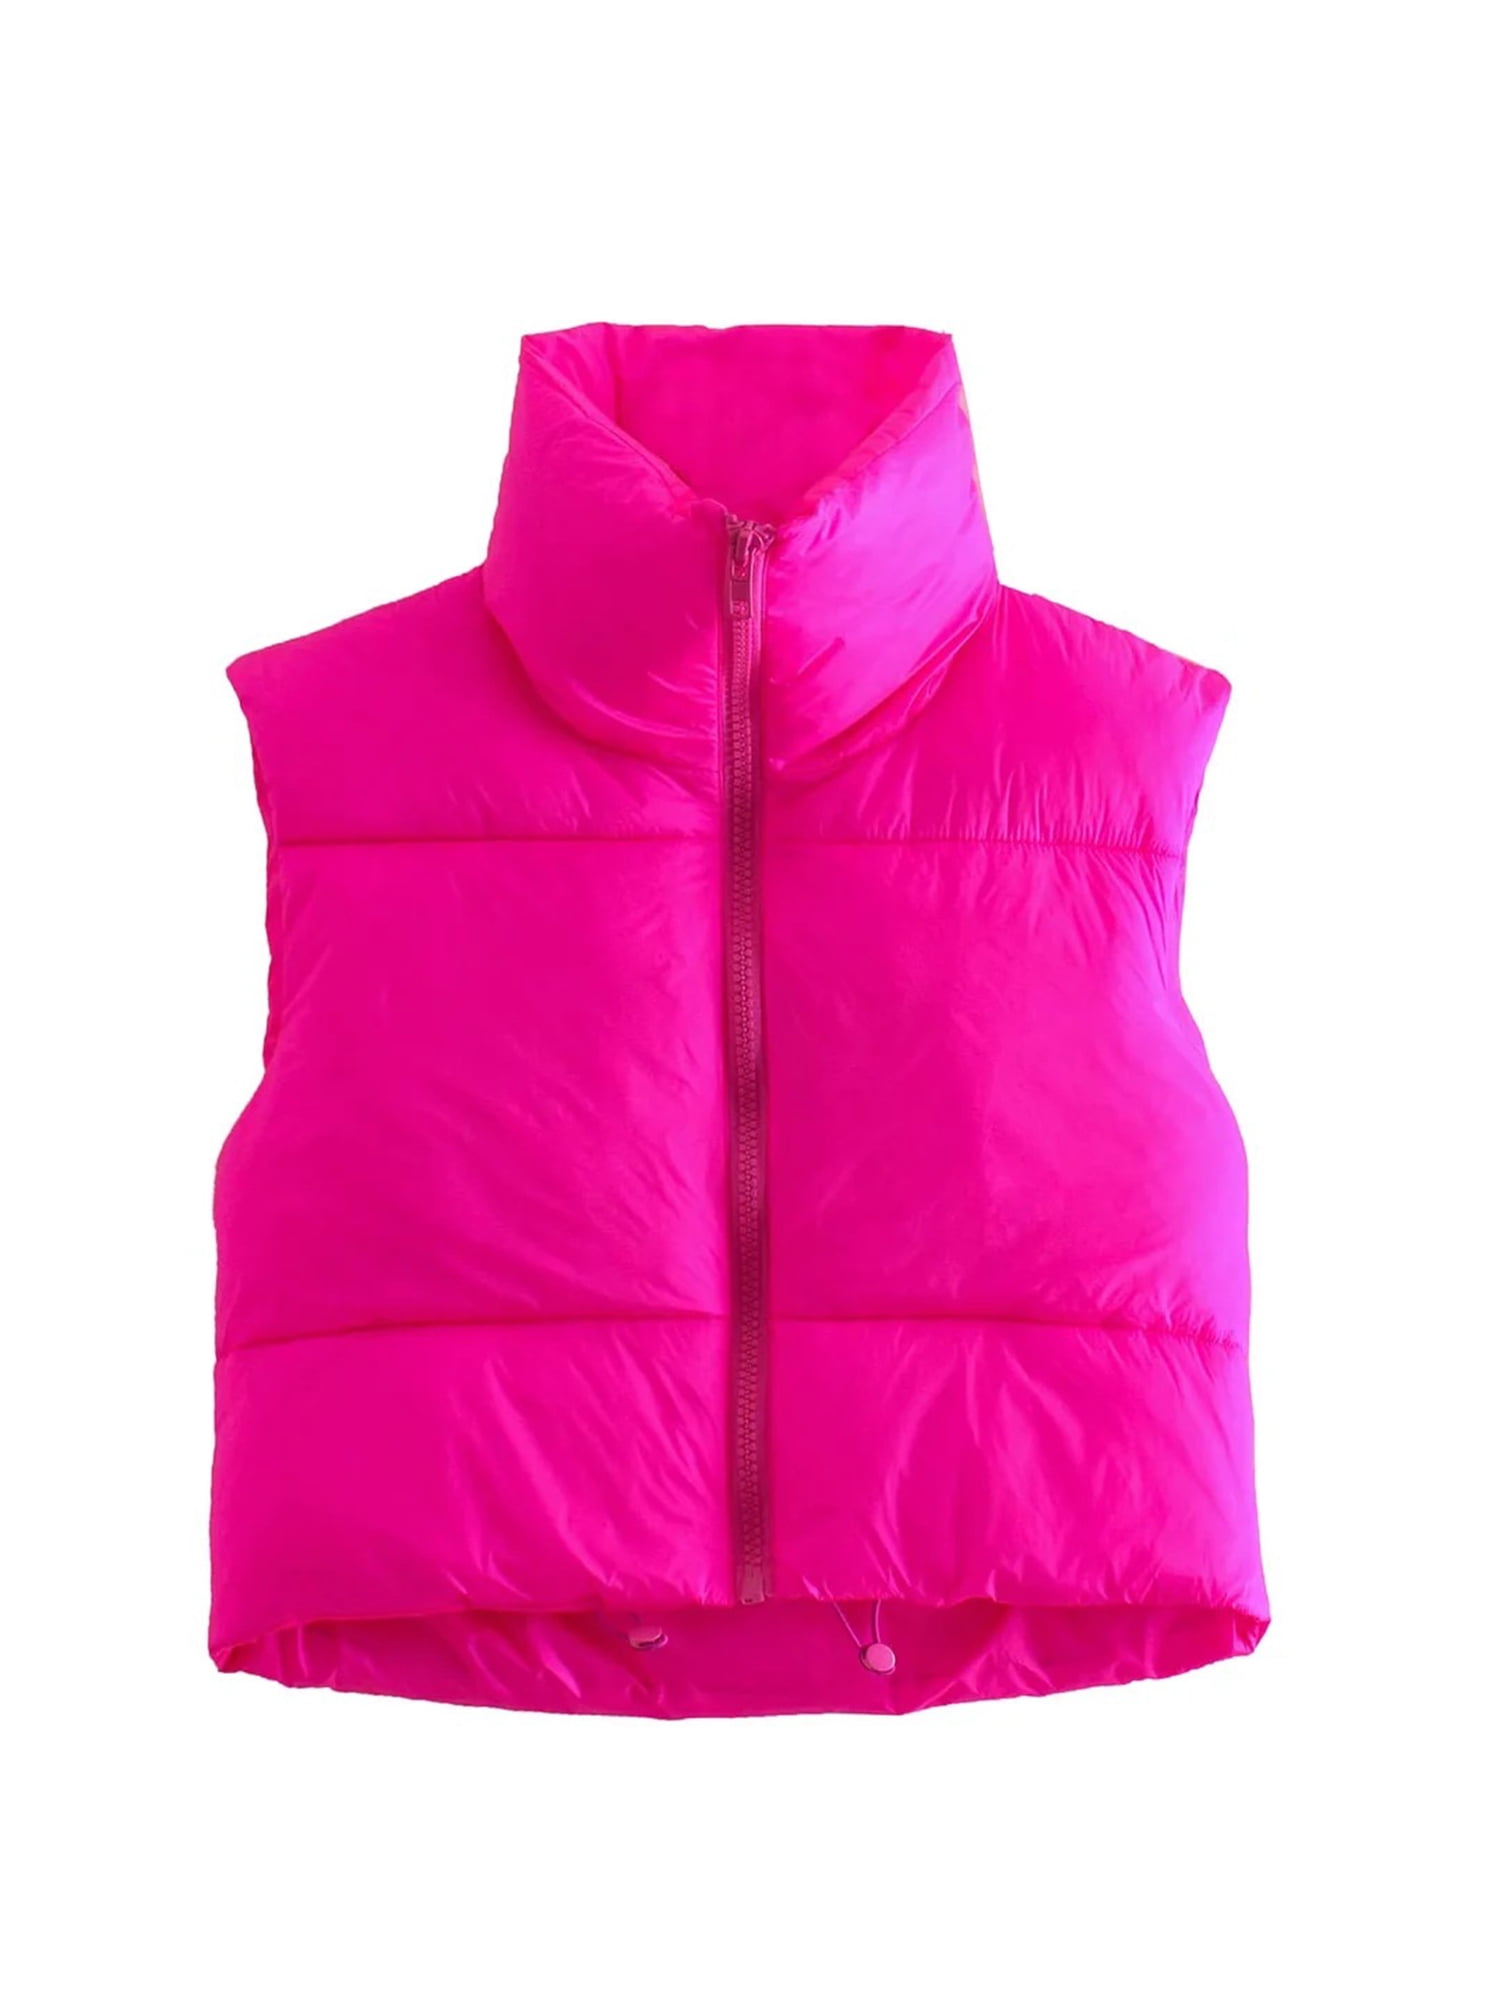 Wrcnote Women Solid Color Drawstring Puffer Vests Lightweight Street Stand  Collar Outwear Sleeveless Padded Coat Rose Red M